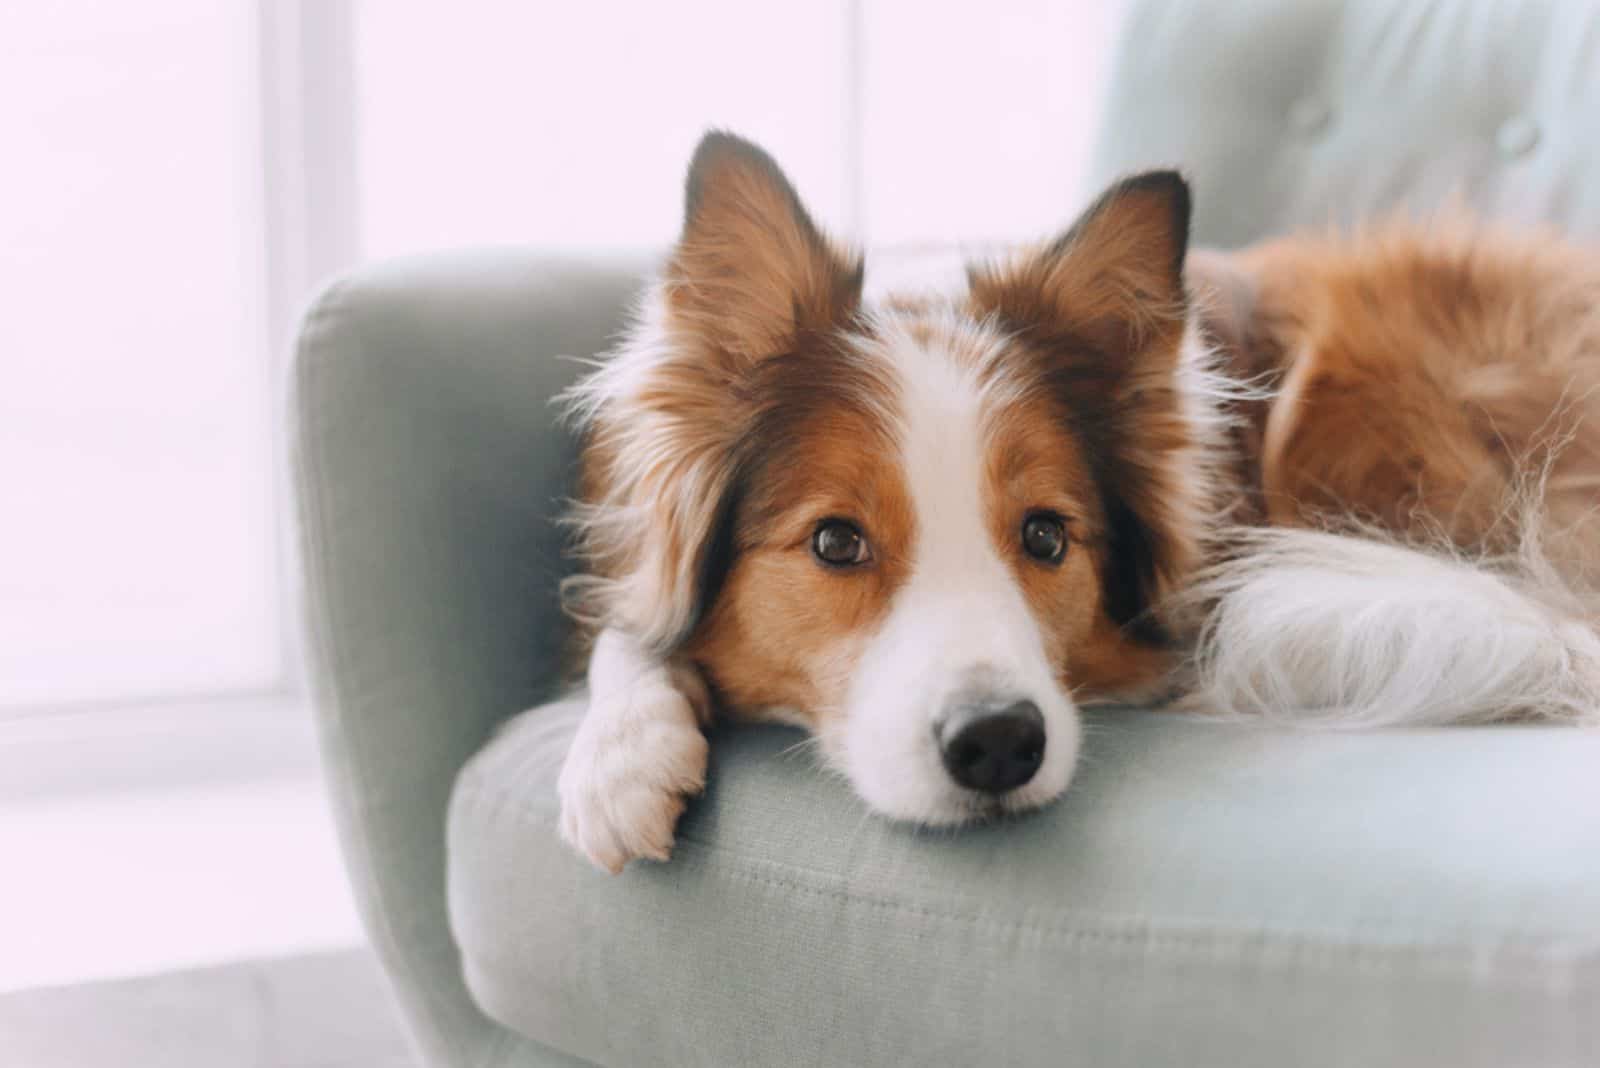 Sad border collie put his head on the sofa and looking in the camera